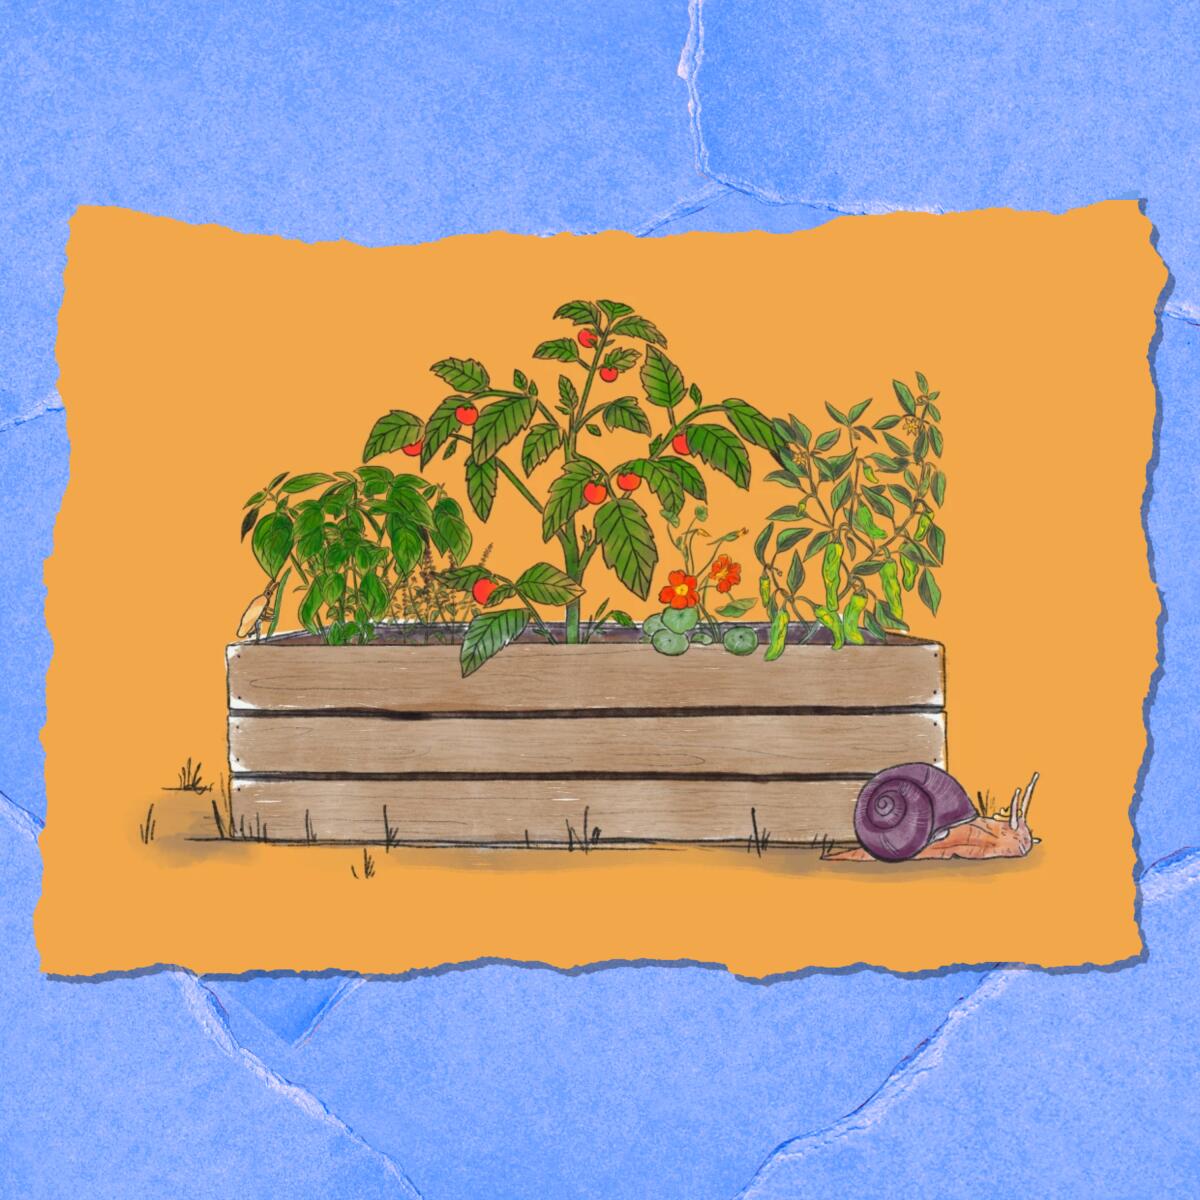 An illustration of a plant container with pepper and tomato plants; a snail crawls in front.